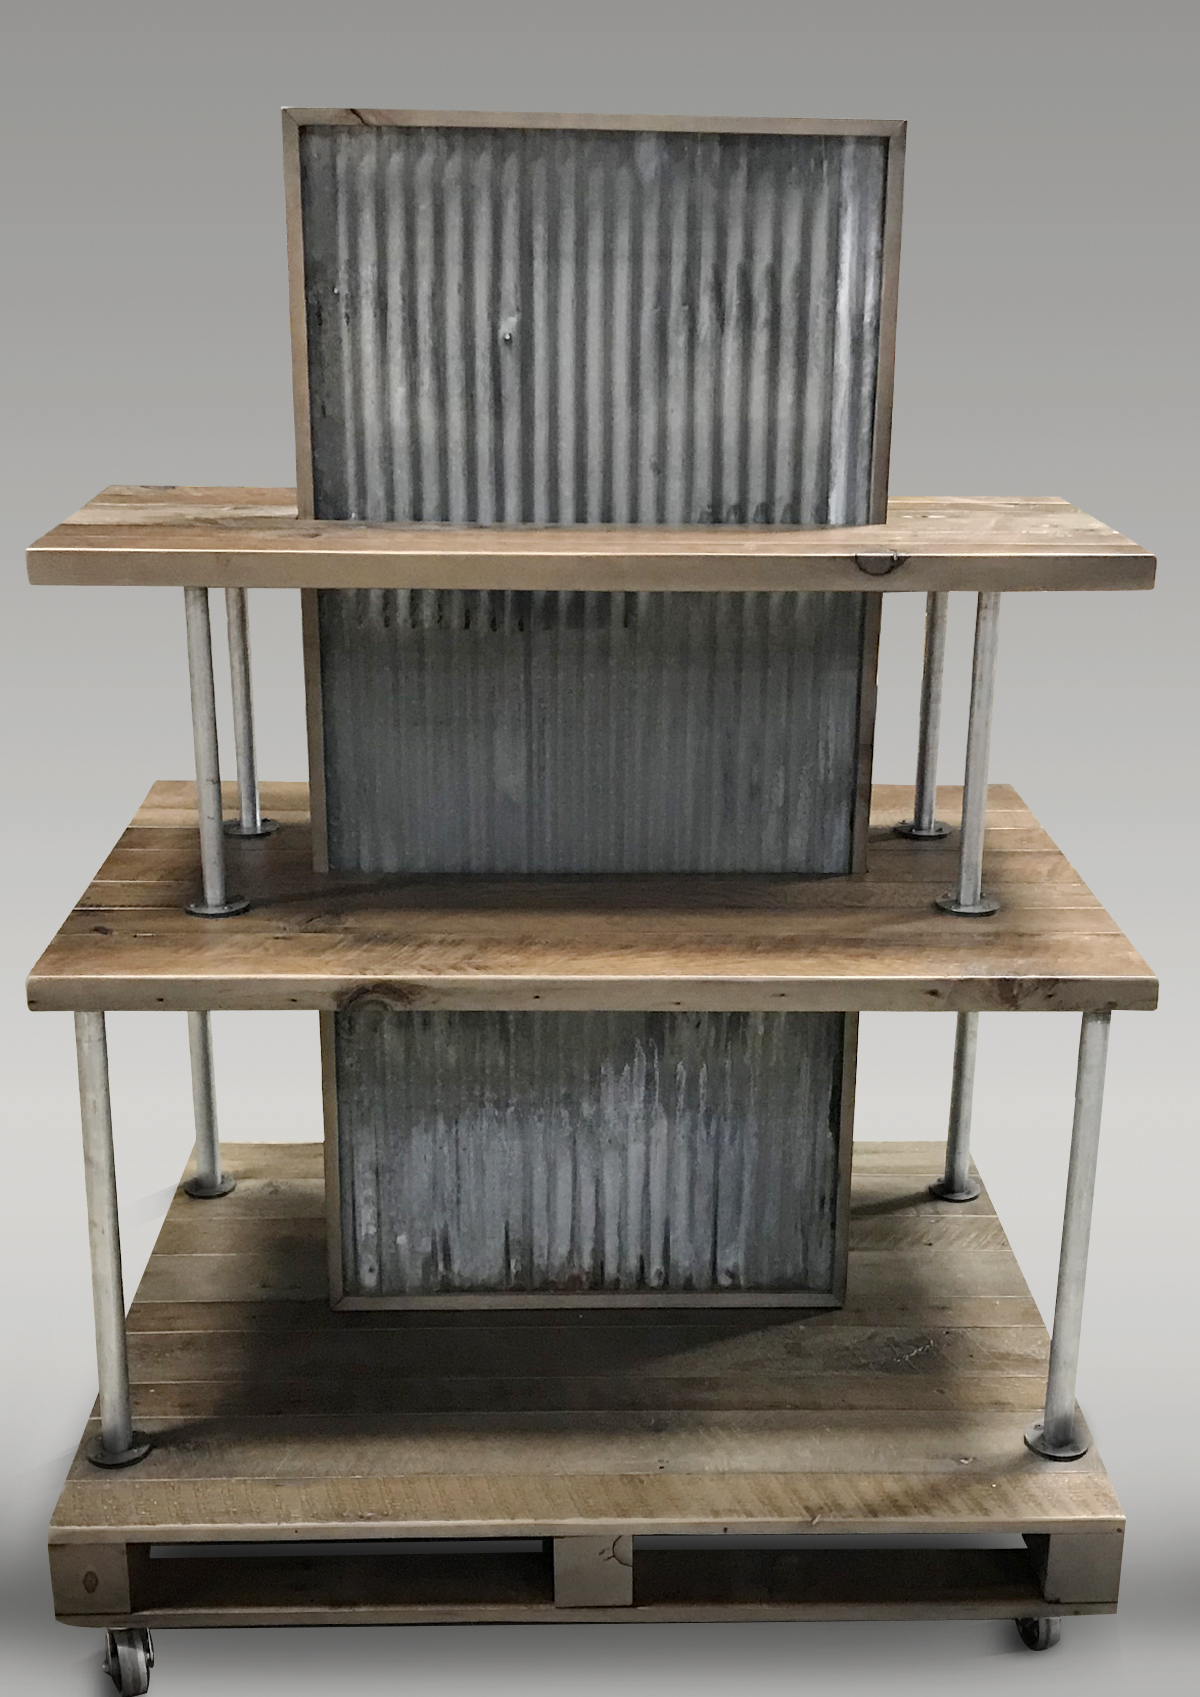 Reclaimed Wood and Galvanized Metal Clothing Display